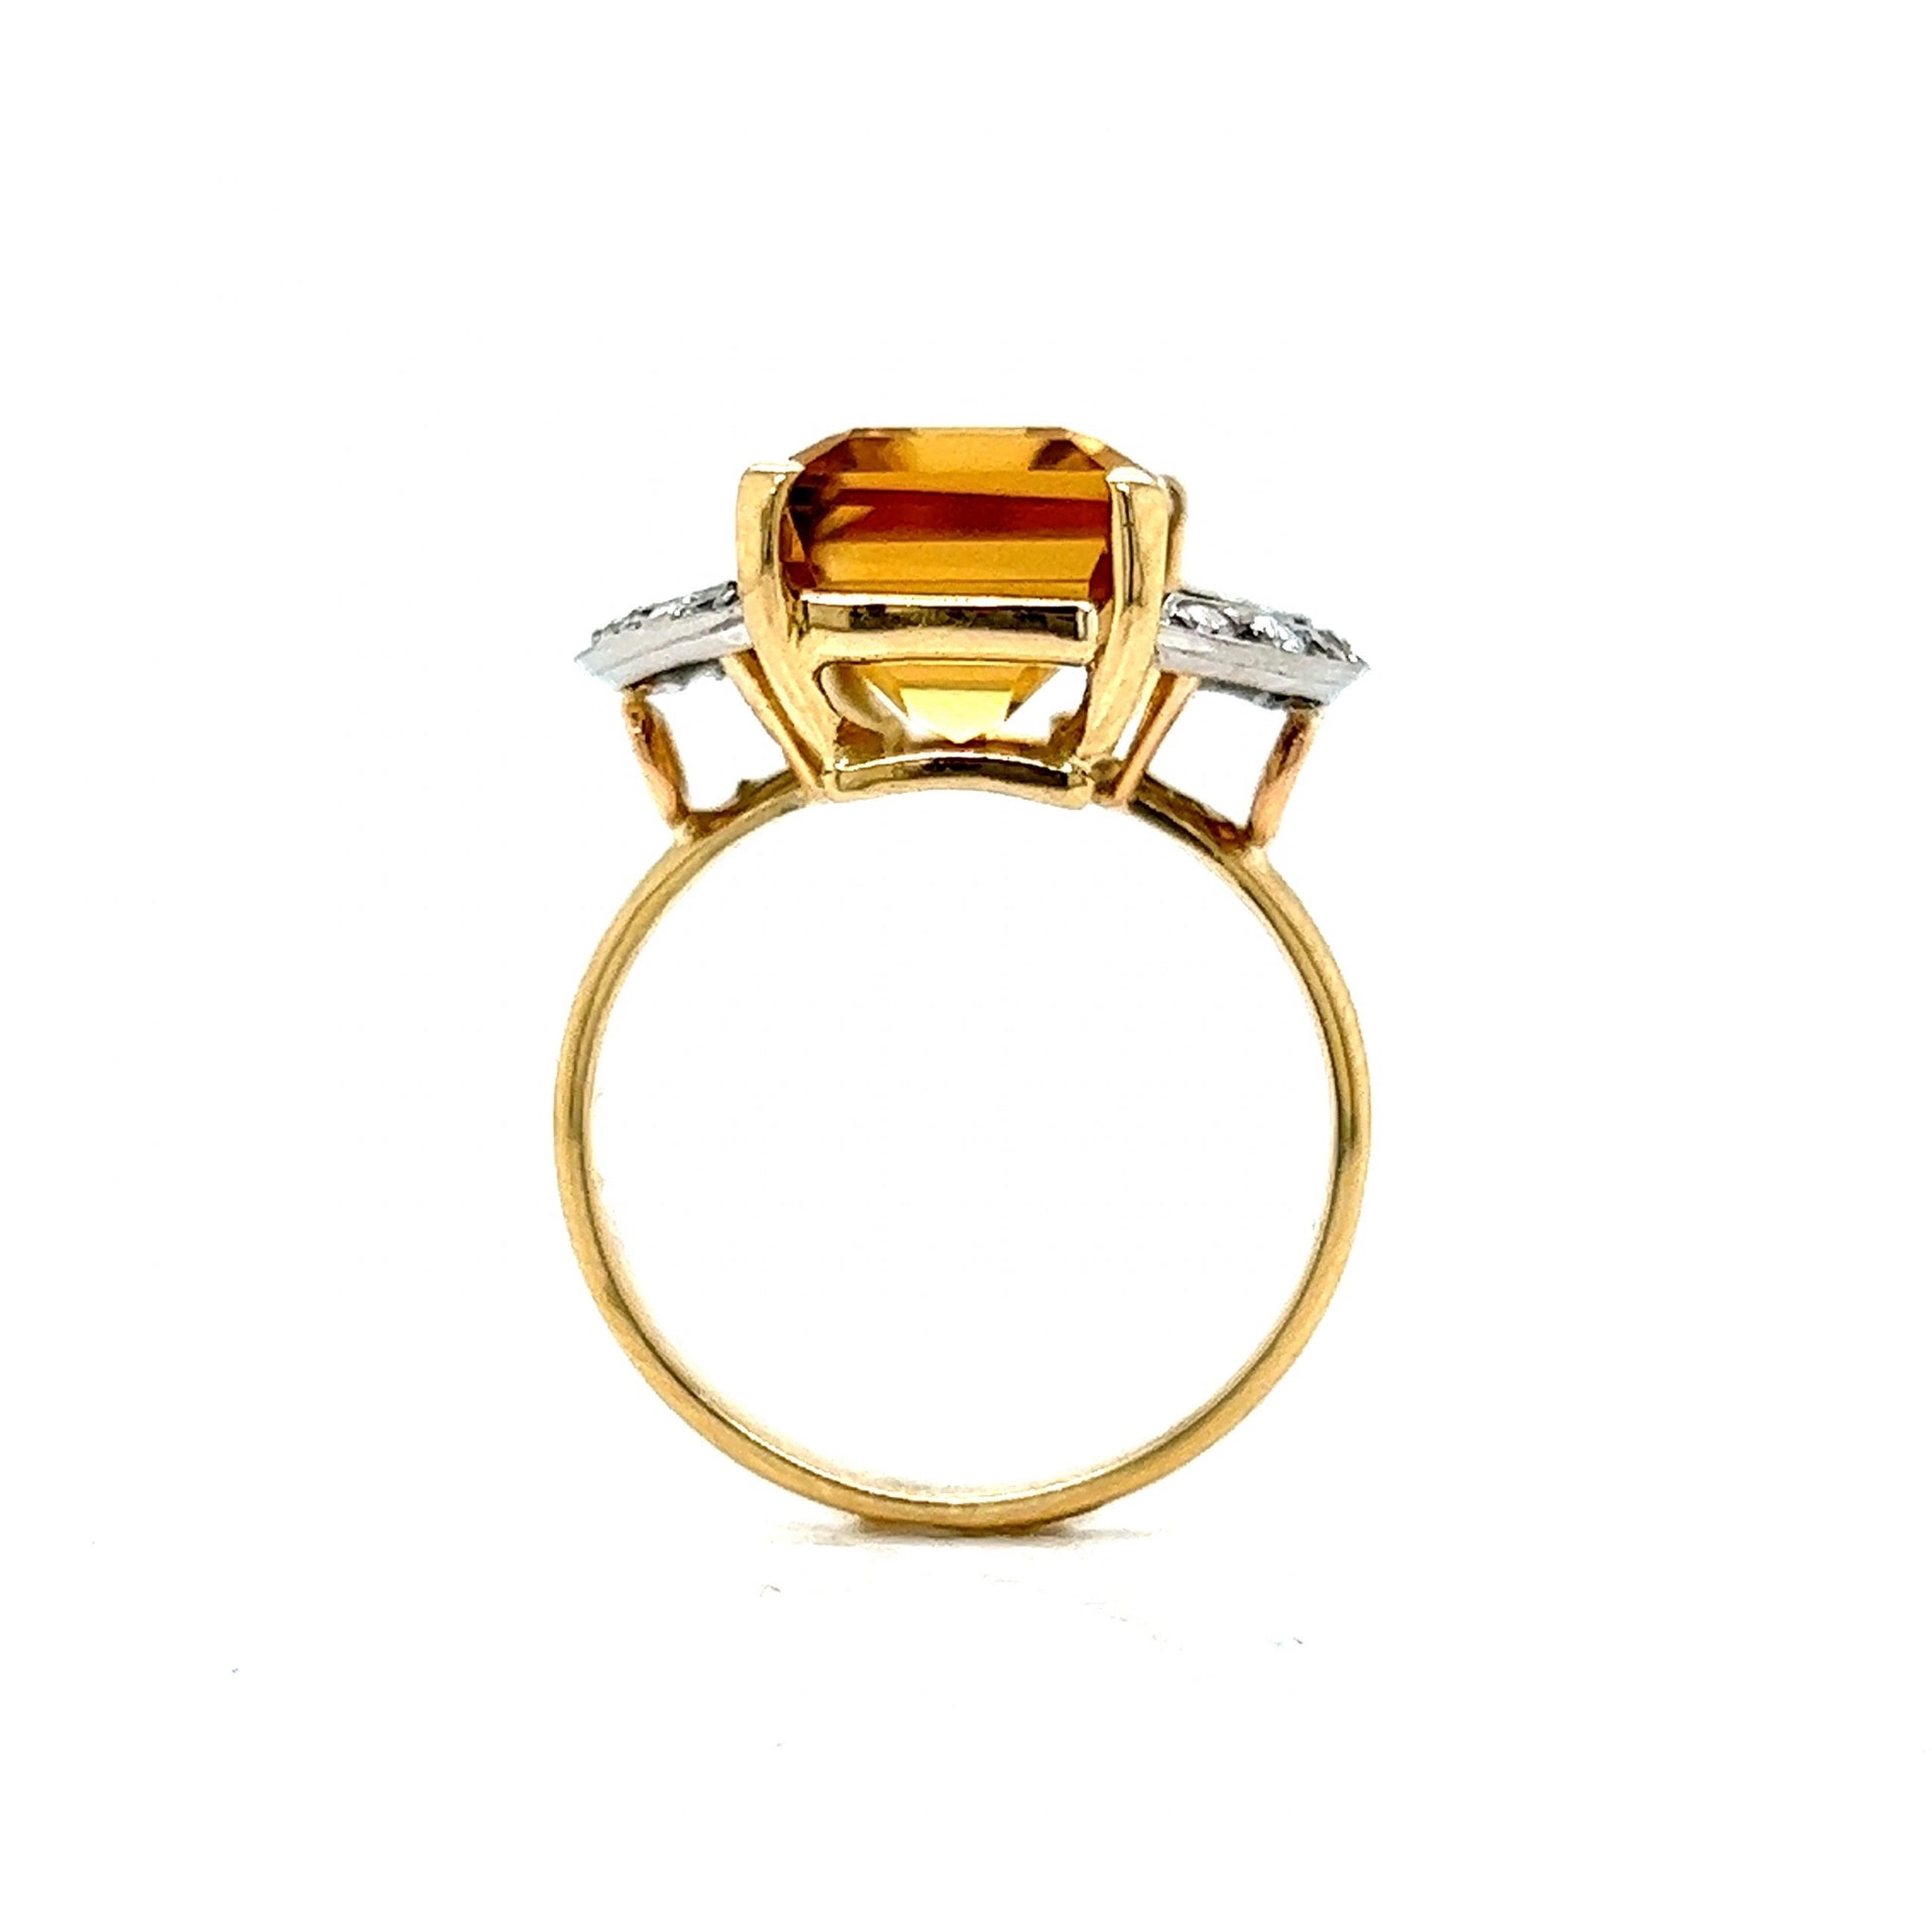 Mid-Century Citrine & Diamond Ring in 18k Yellow GoldComposition: 18 Karat Yellow Gold Ring Size: 5.75 Total Diamond Weight: .24ct Total Gram Weight: 5.4 g Inscription: 750
      